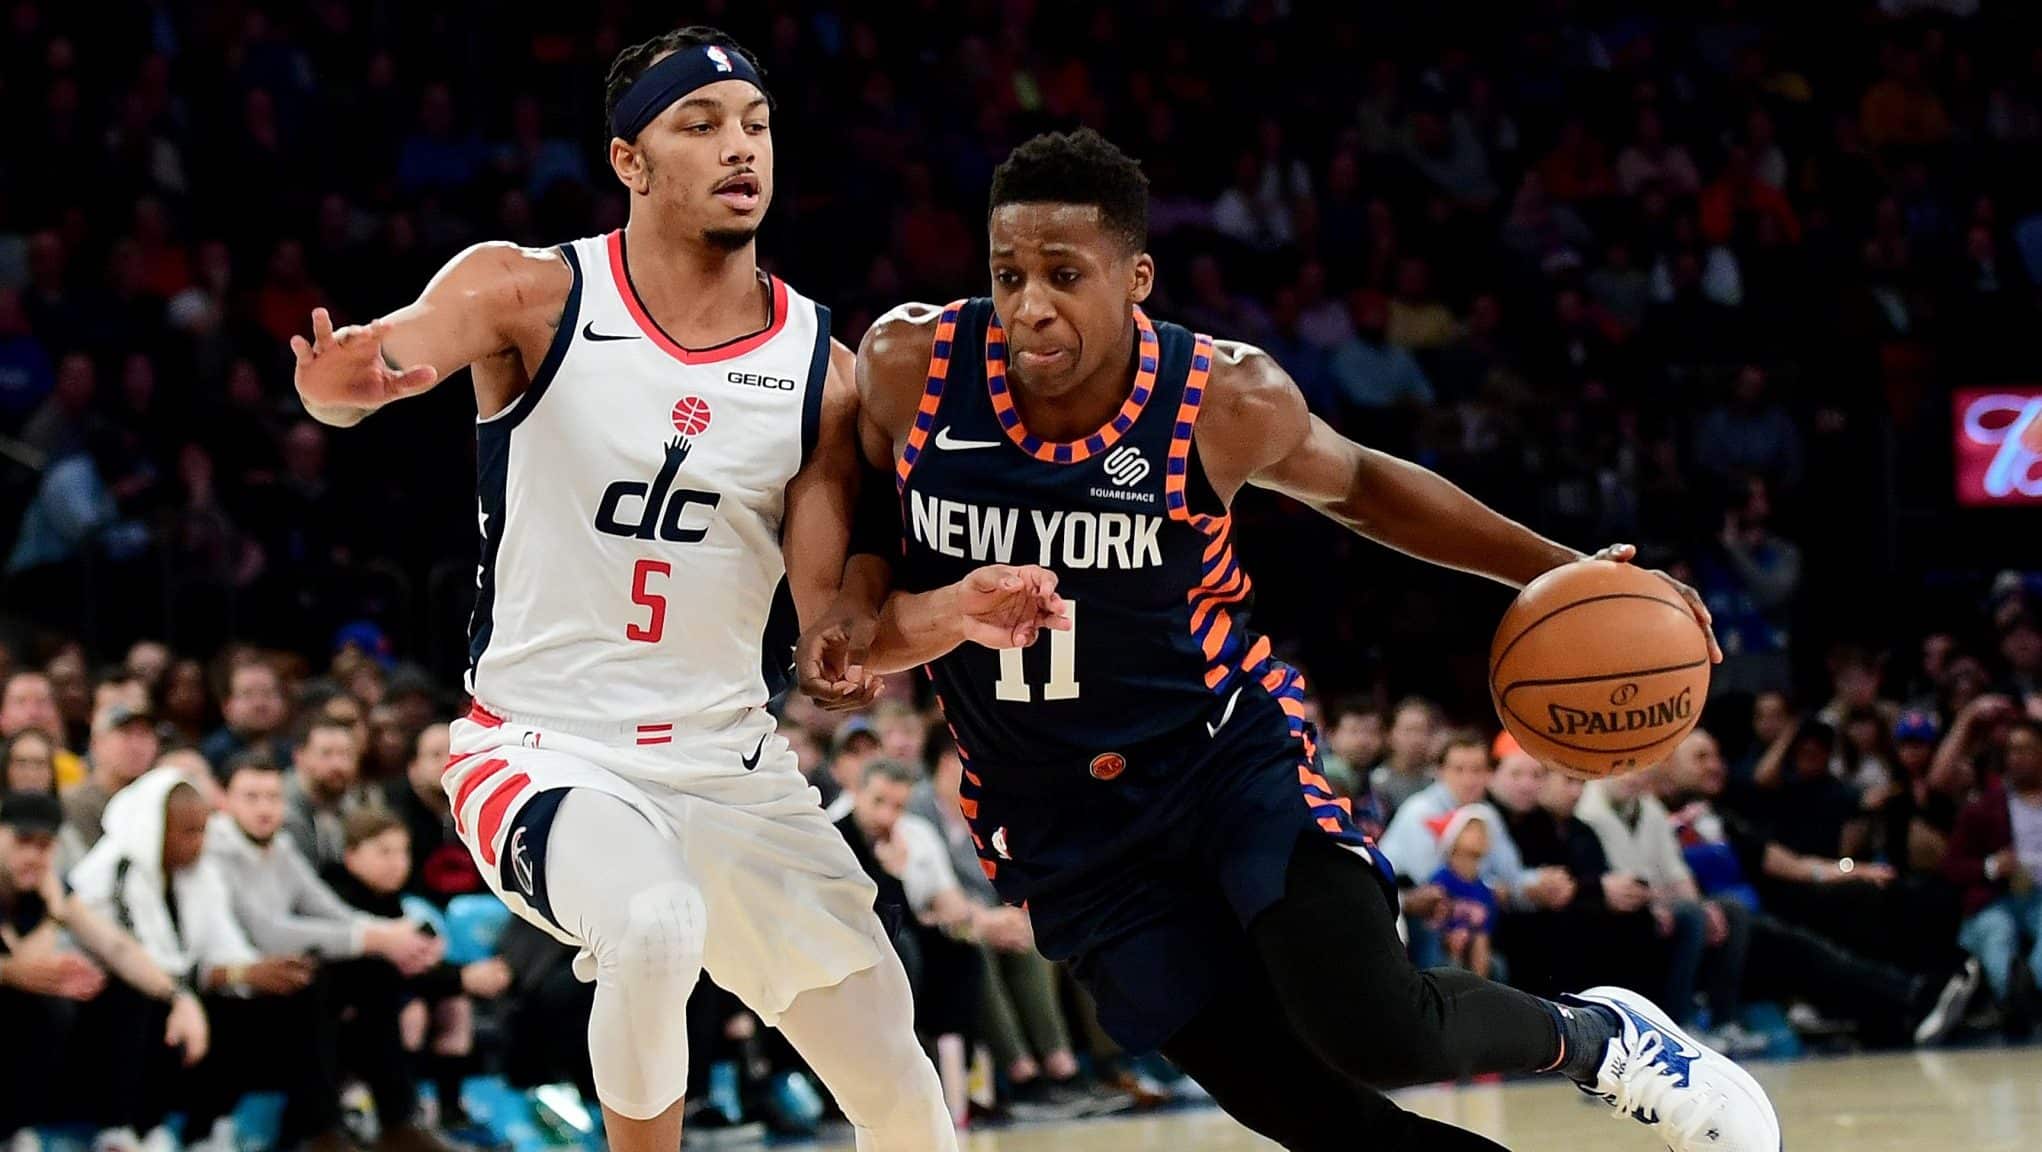 NEW YORK, NEW YORK - DECEMBER 23: Frank Ntilikina #11 of the New York Knicks drives past Justin Robinson #5 of the Washington Wizards during the second half of their game at Madison Square Garden on December 23, 2019 in New York City. NOTE TO USER: User expressly acknowledges and agrees that, by downloading and or using this photograph, User is consenting to the terms and conditions of the Getty Images License Agreement.